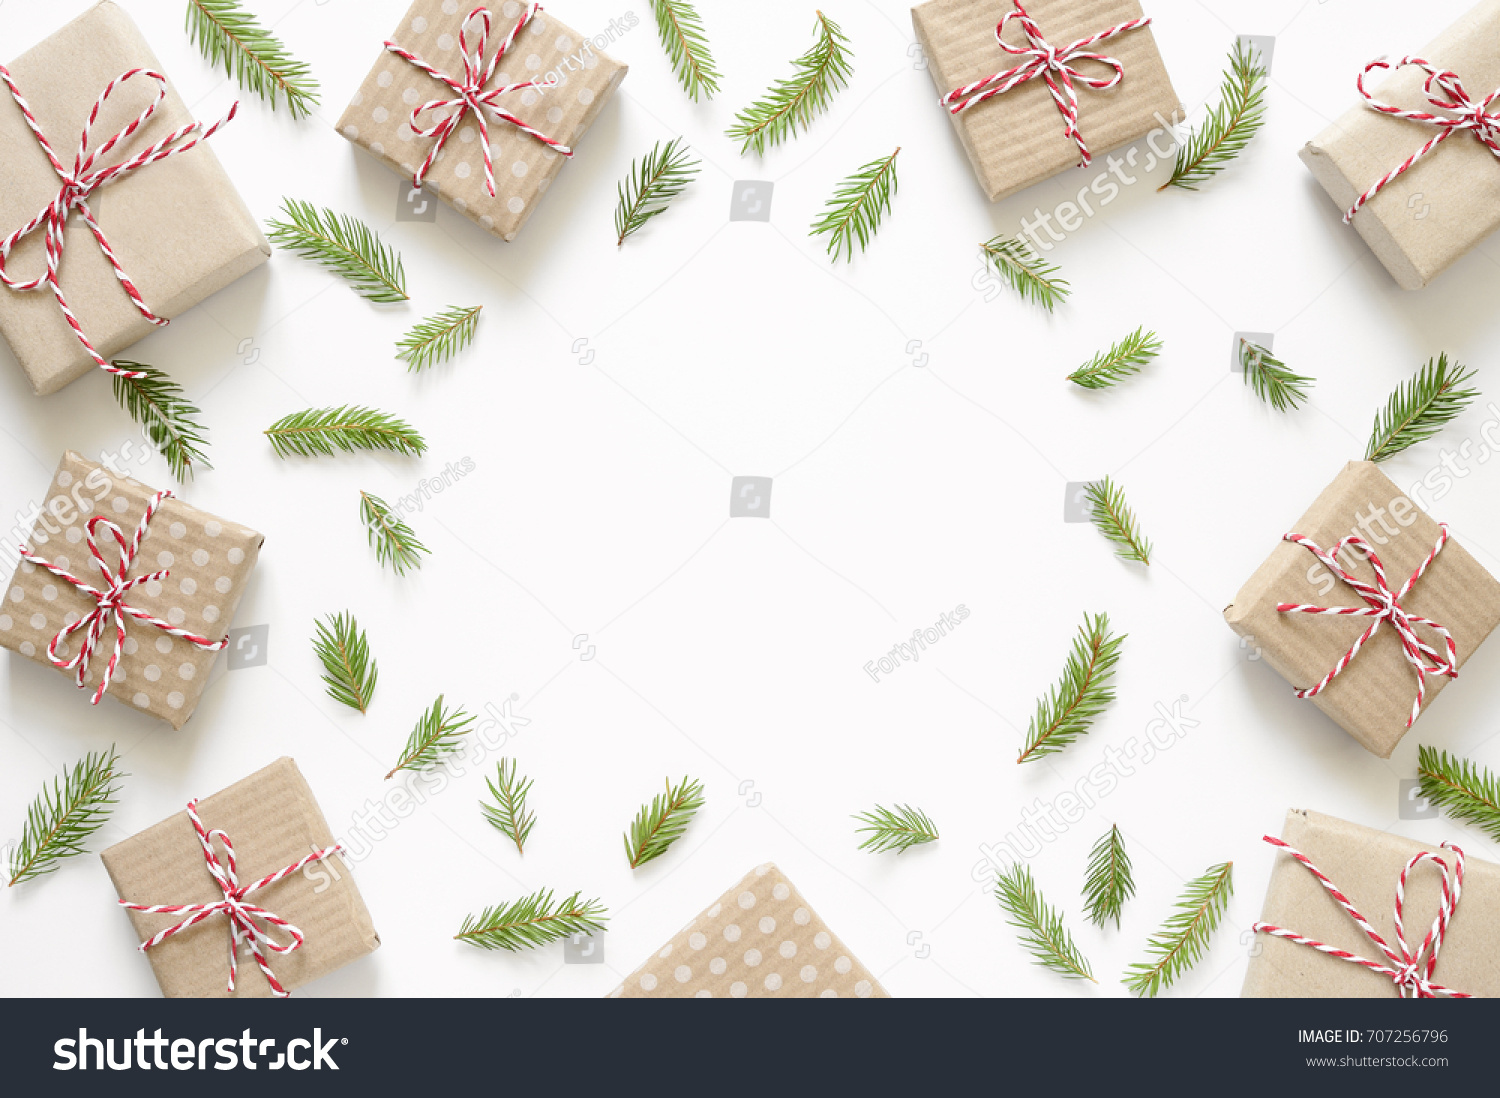 Christmas simple background with simple paper wrapped presents put around, flat lay, view from above, space for a text #707256796